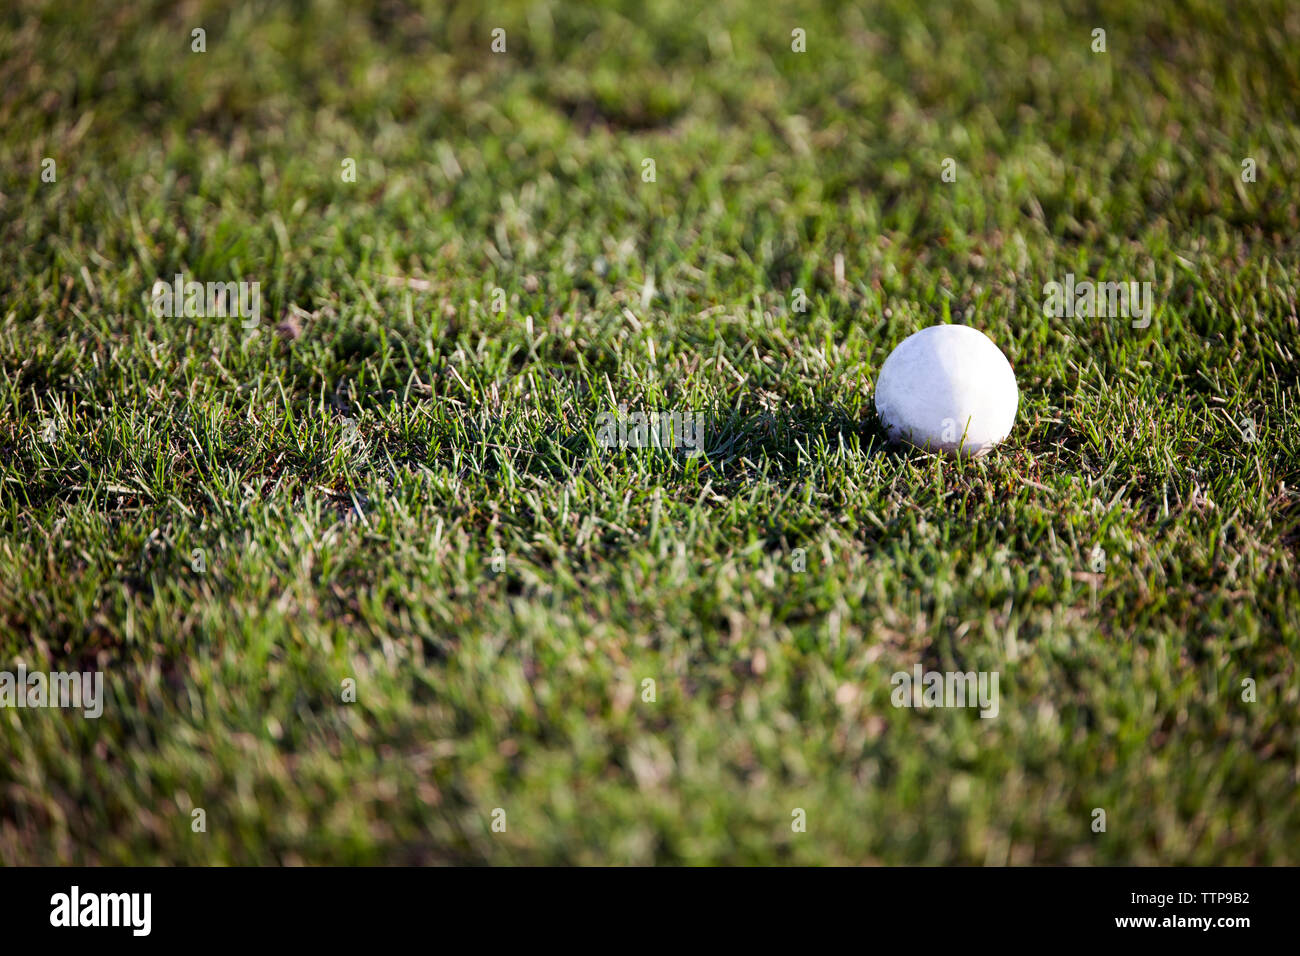 High angle view of ball on grassy field Banque D'Images